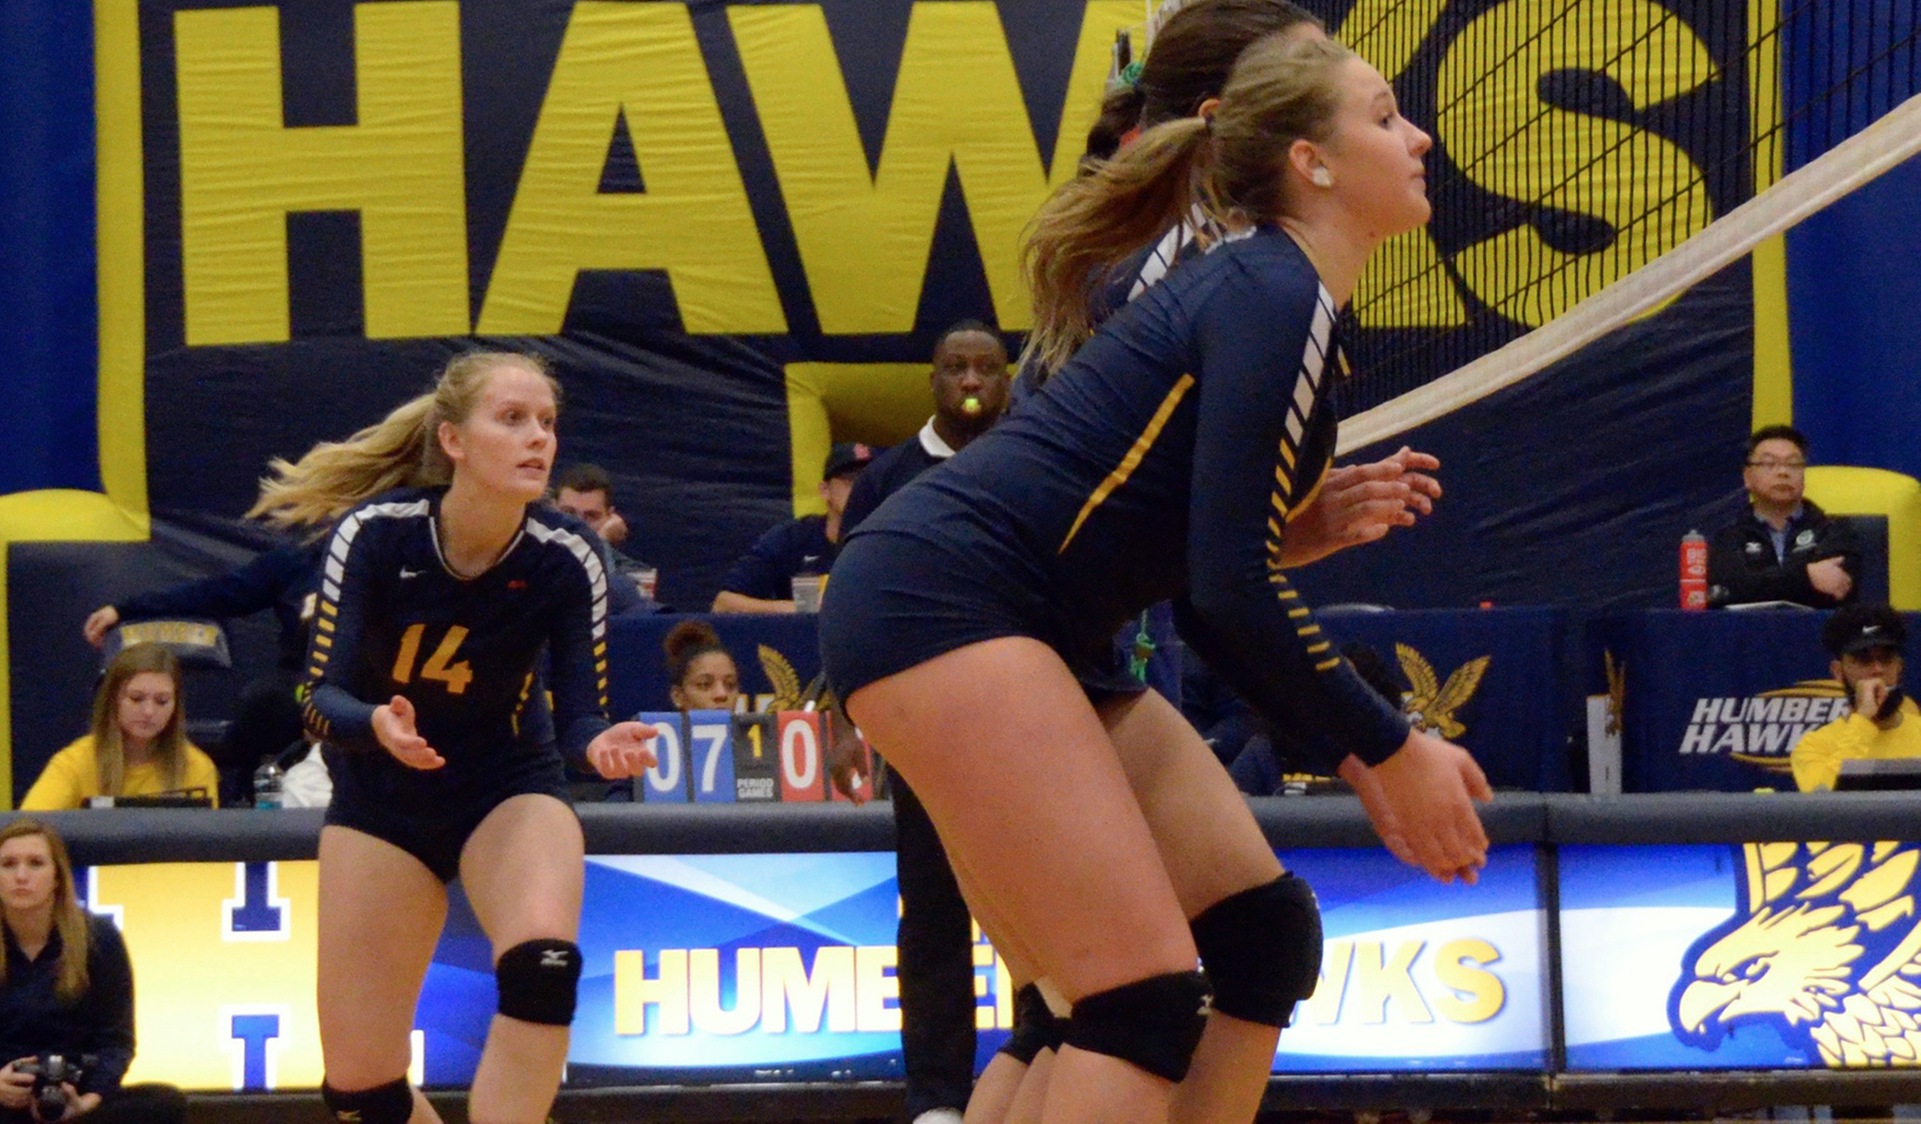 HAWKS LOOK TO CLOSE OUT EXHIBITION RUN ON THURSDAY WITH WIN AT HOME VS SENECA